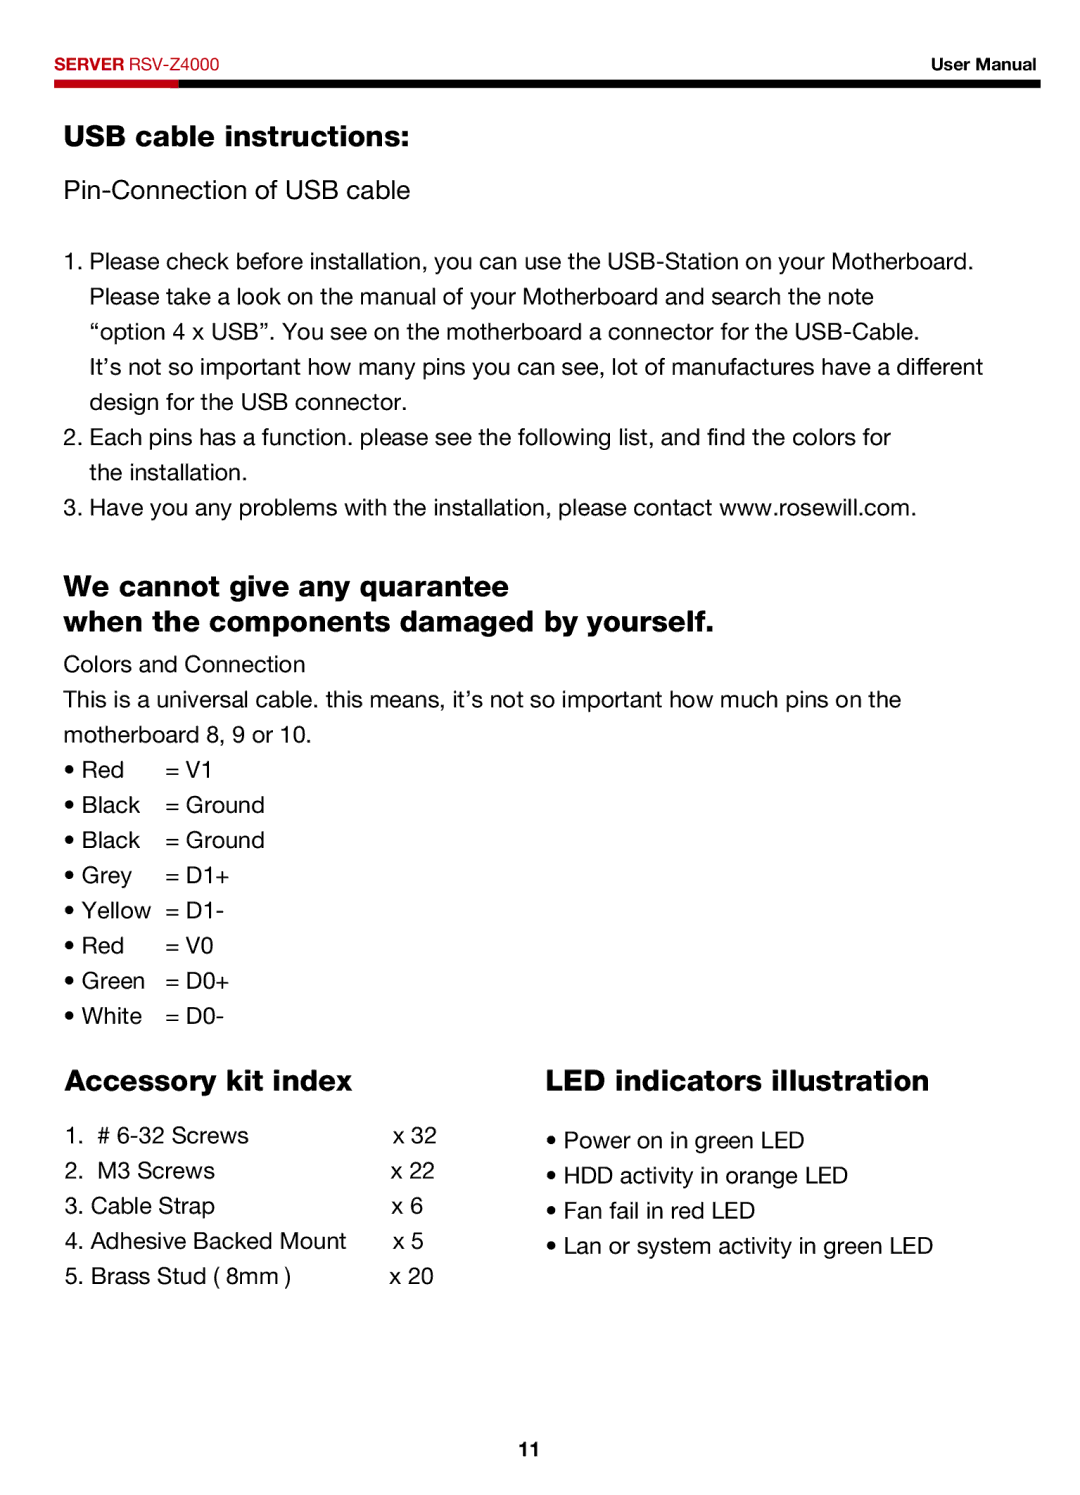 Rosewill RSV-Z4000 user manual USB cable instructions, Accessory kit index LED indicators illustration 